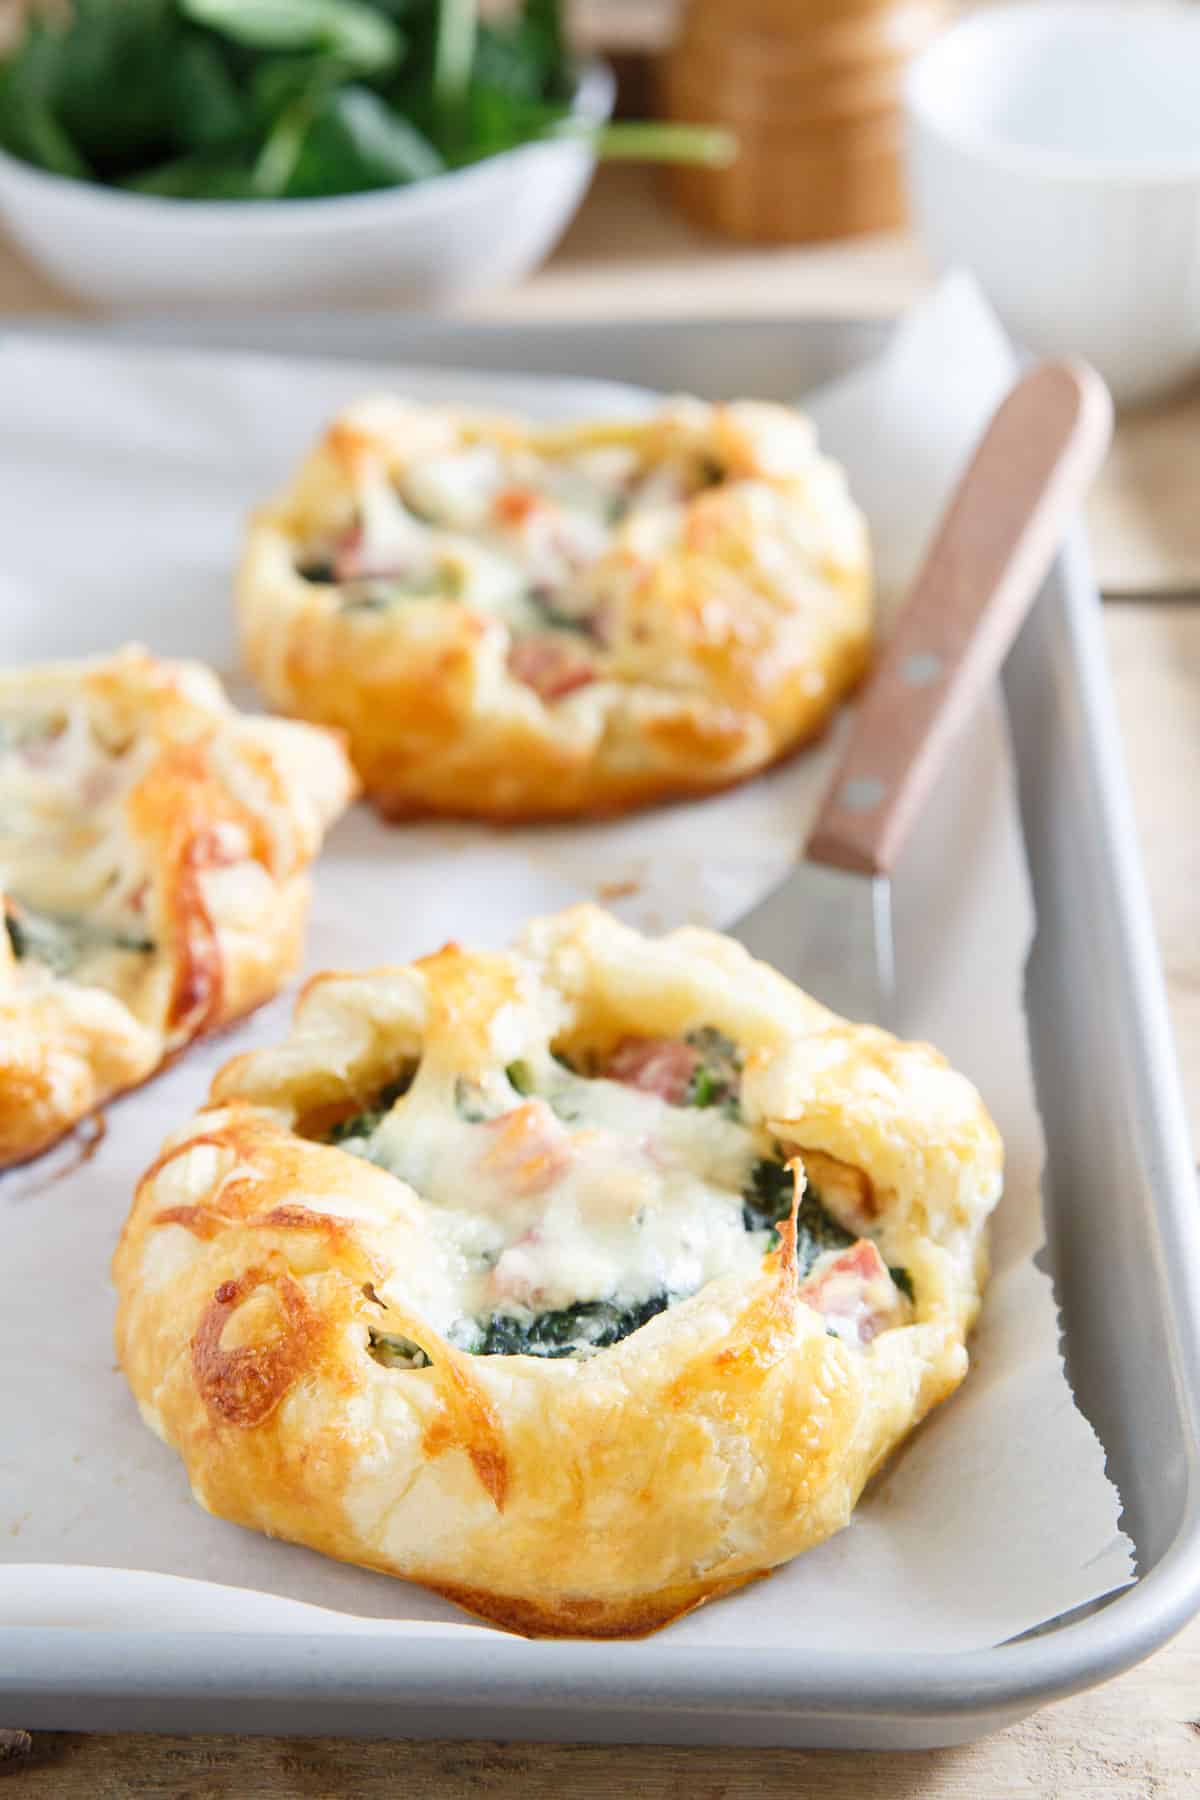 Enjoy these ham cheese and spinach breakfast pies on your way out the door in the morning or even as an easy brinner option!